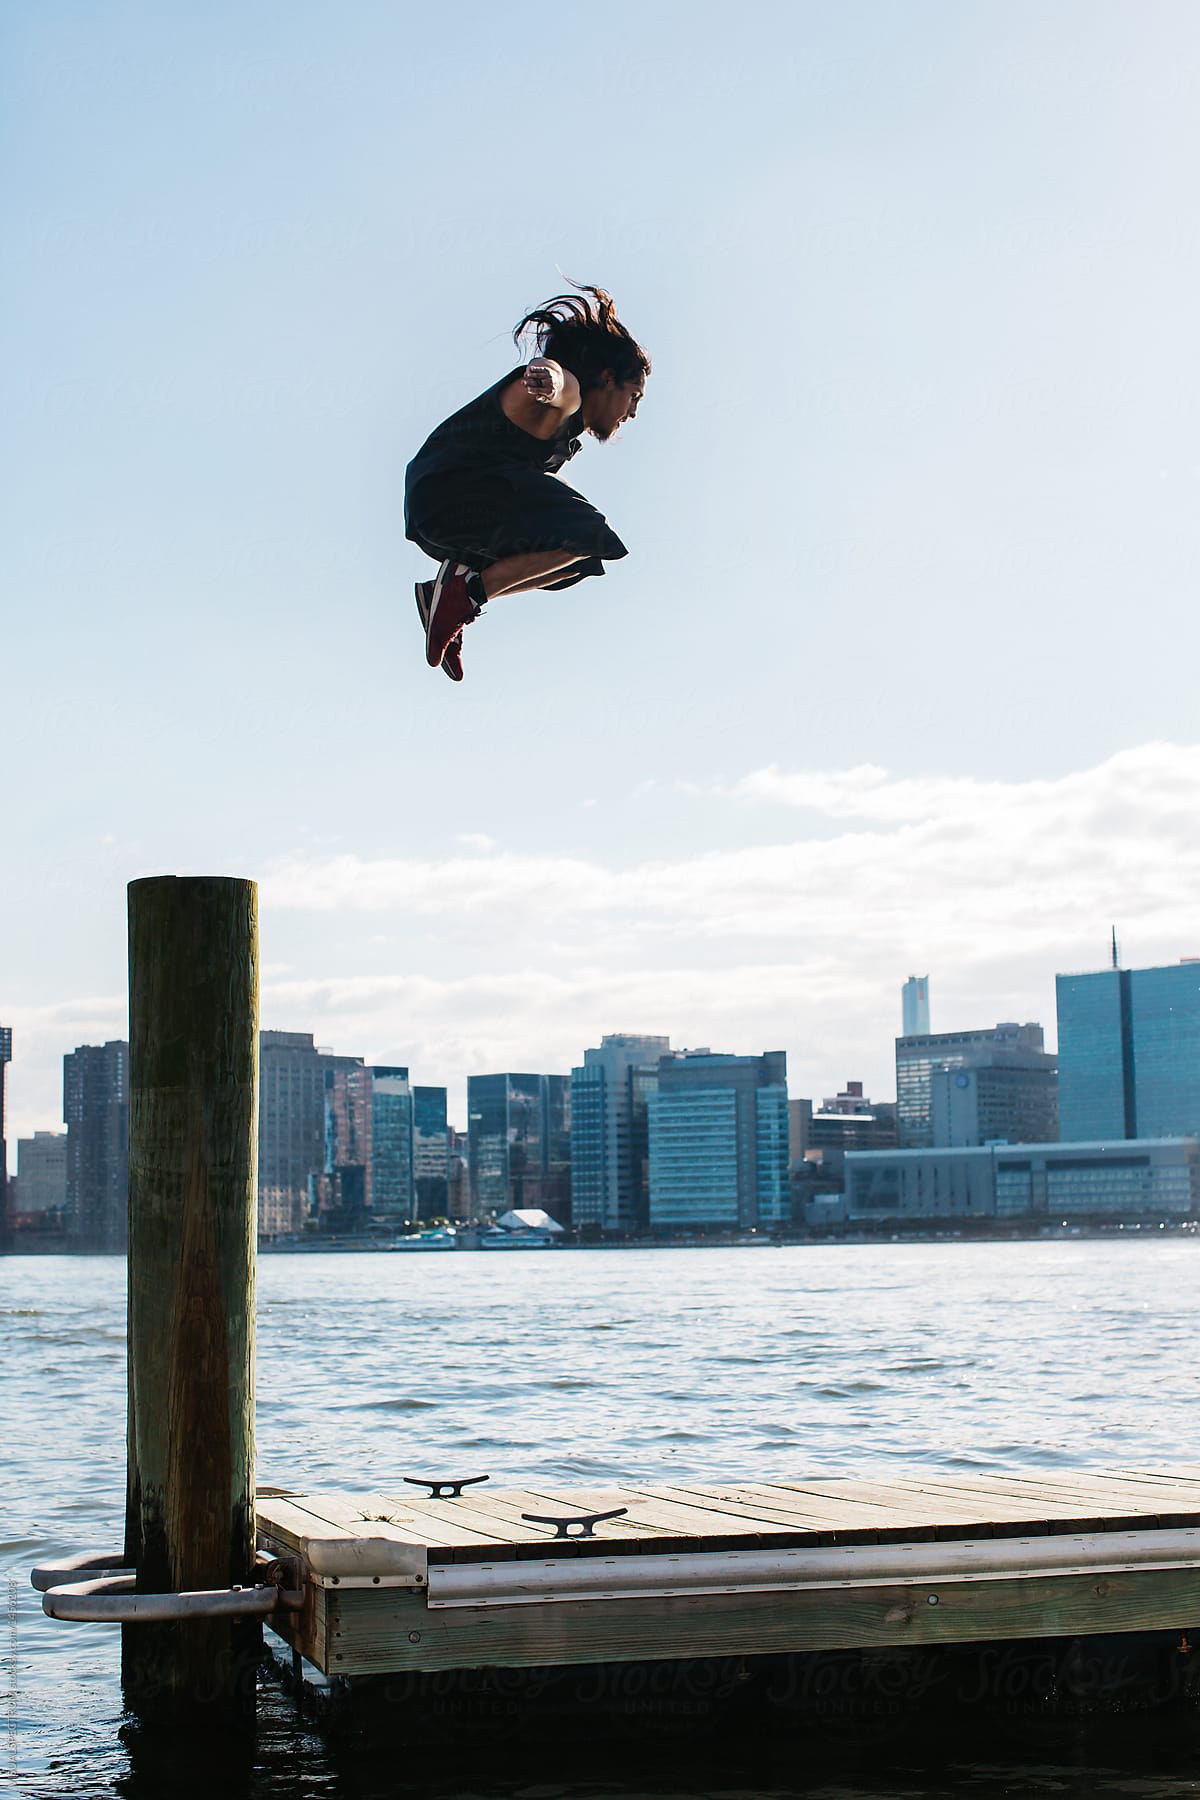 Parkour - Young Man Doing a High Jump From Wooden Pole